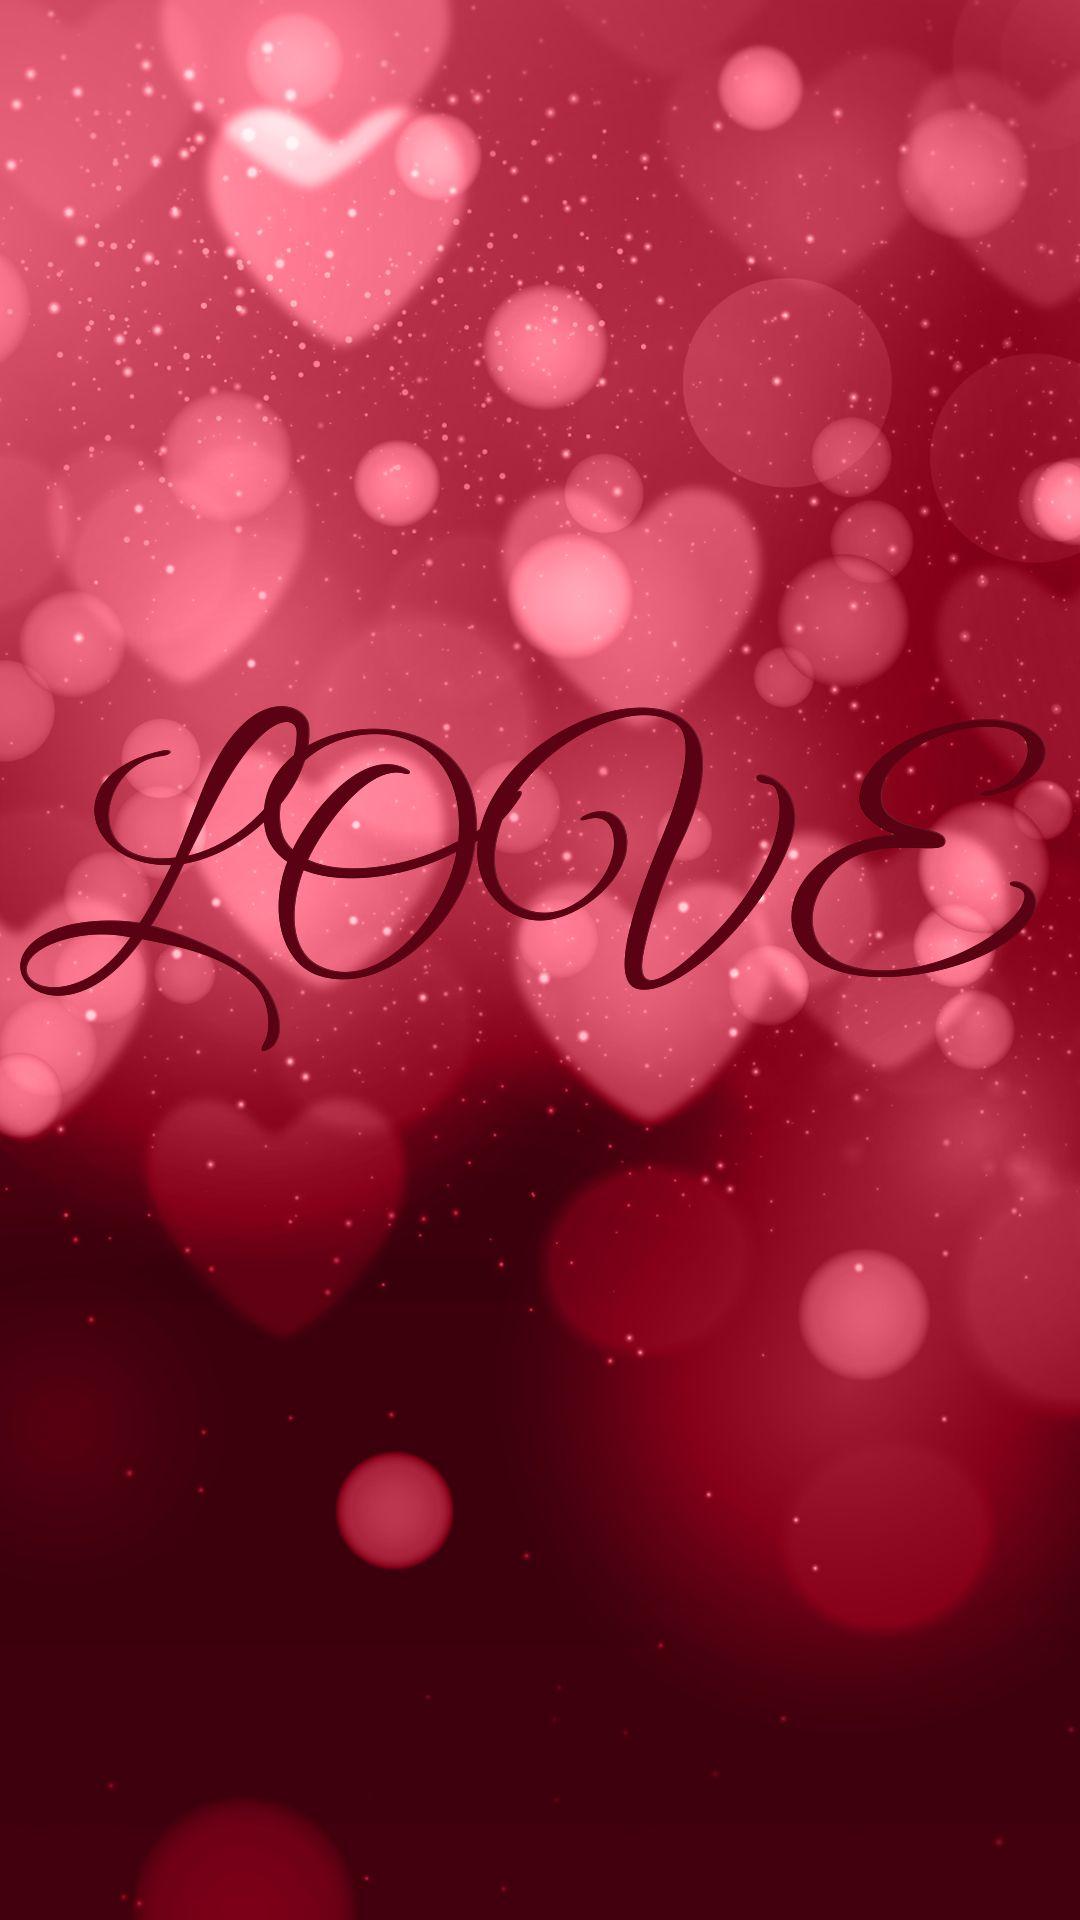 Love iPhone Wallpaper Hupages Download iPhone Wallpaper